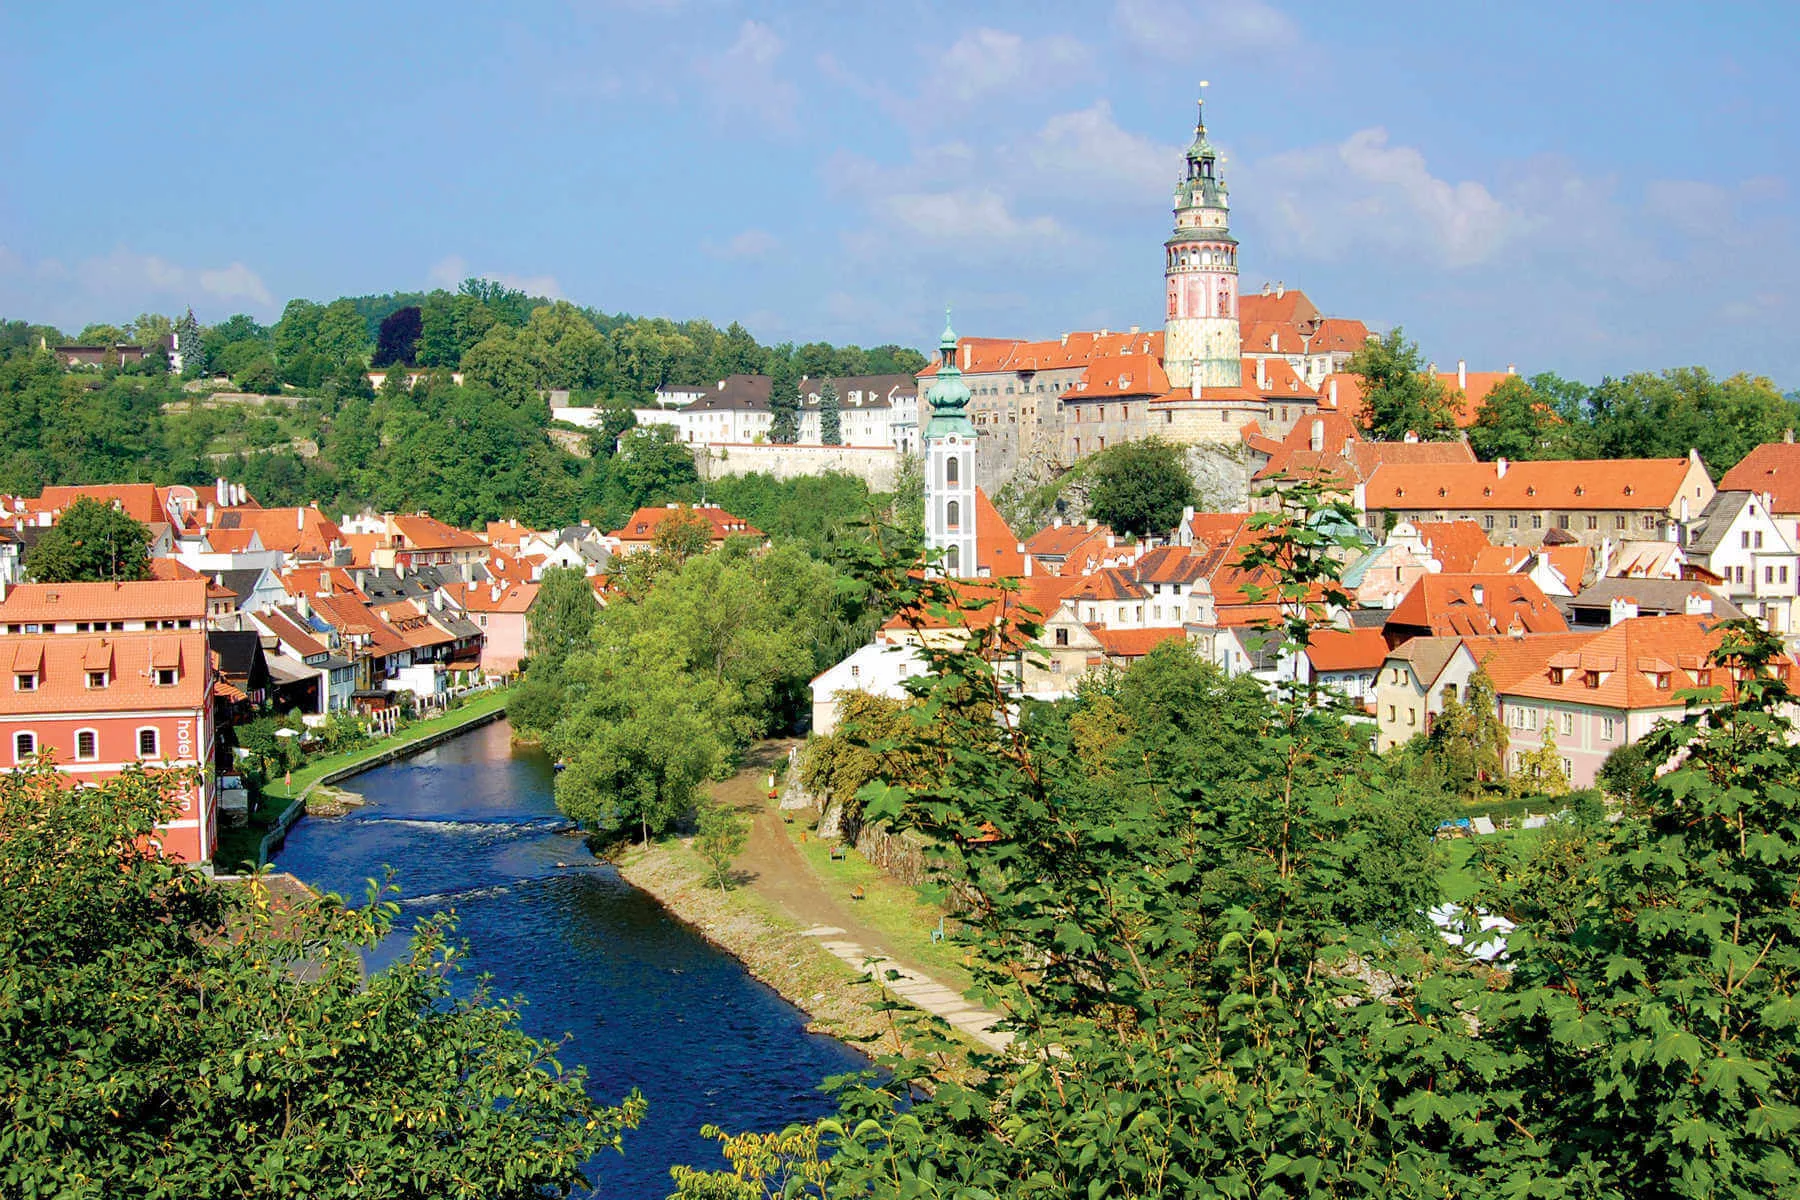 With its awe-inspiring castle, delightful Old Town of shops and cobbled lanes, characteristic little restaurants, and easy canoeing options, Ceský Krumlov has been discovered — but not spoiled — by tourist